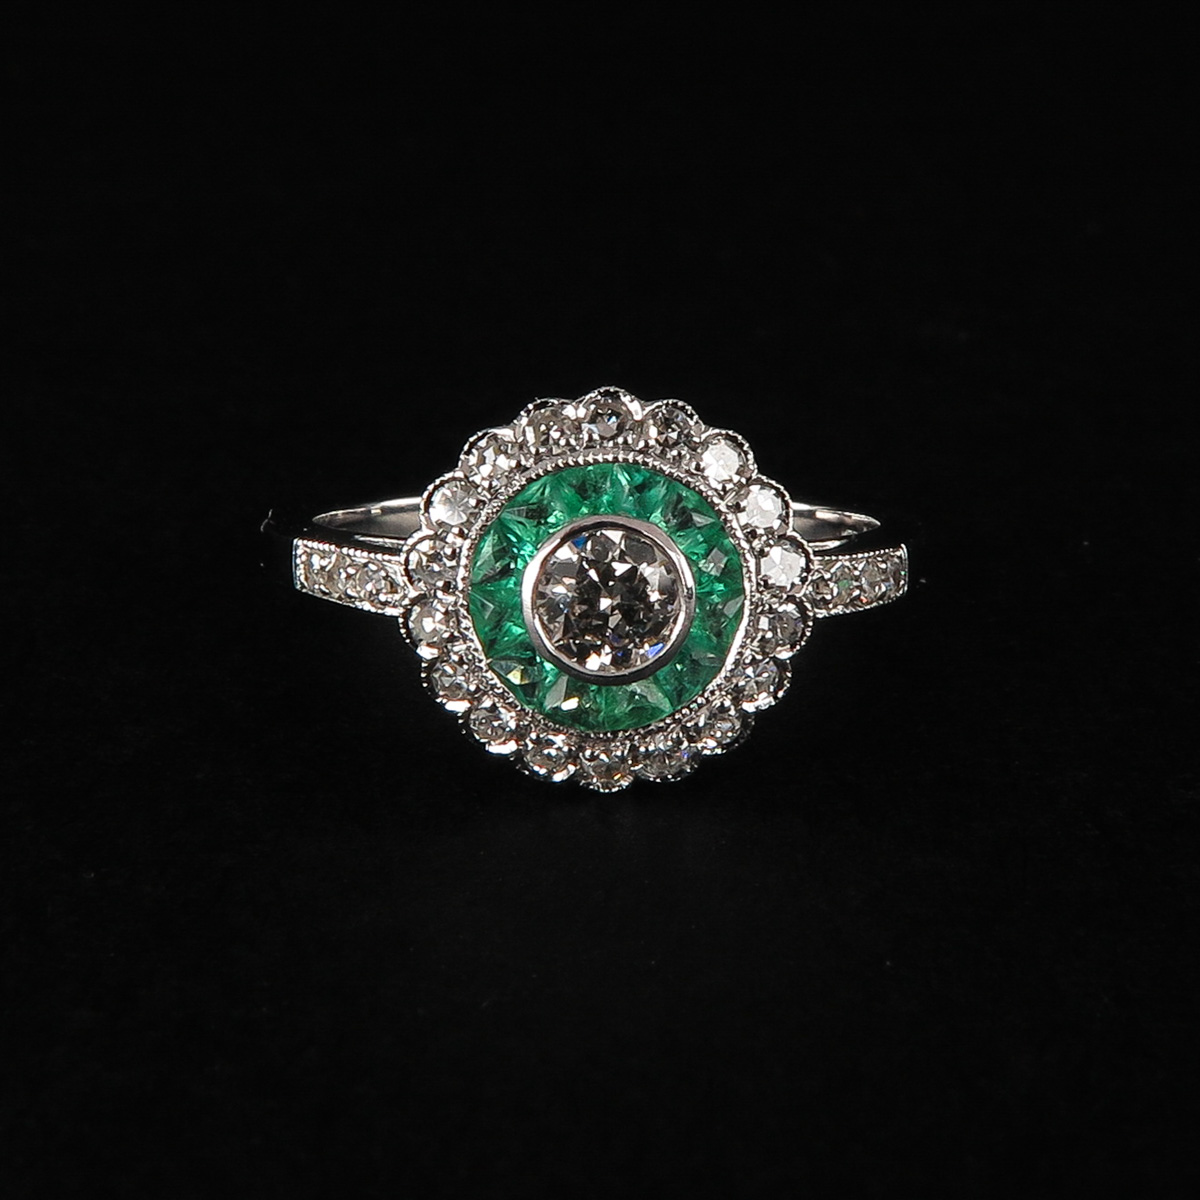 A Ladies Emerald and Diamond Ring - Image 2 of 5